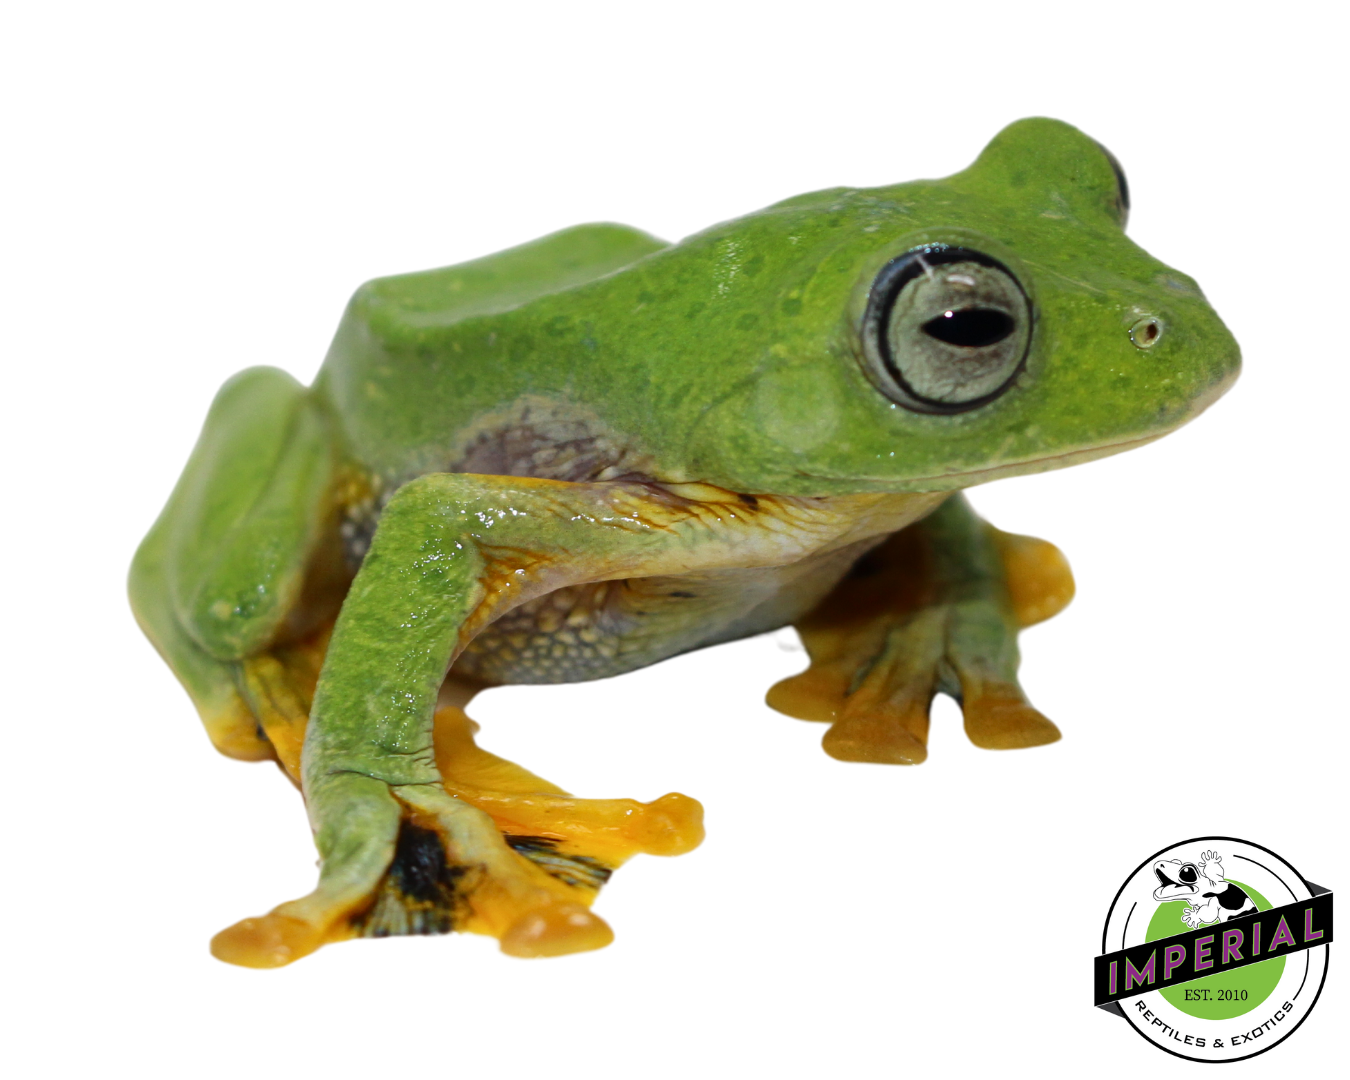 Blue Webbed Gliding Tree Frog for sale, reptiles for sale, buy reptiles online